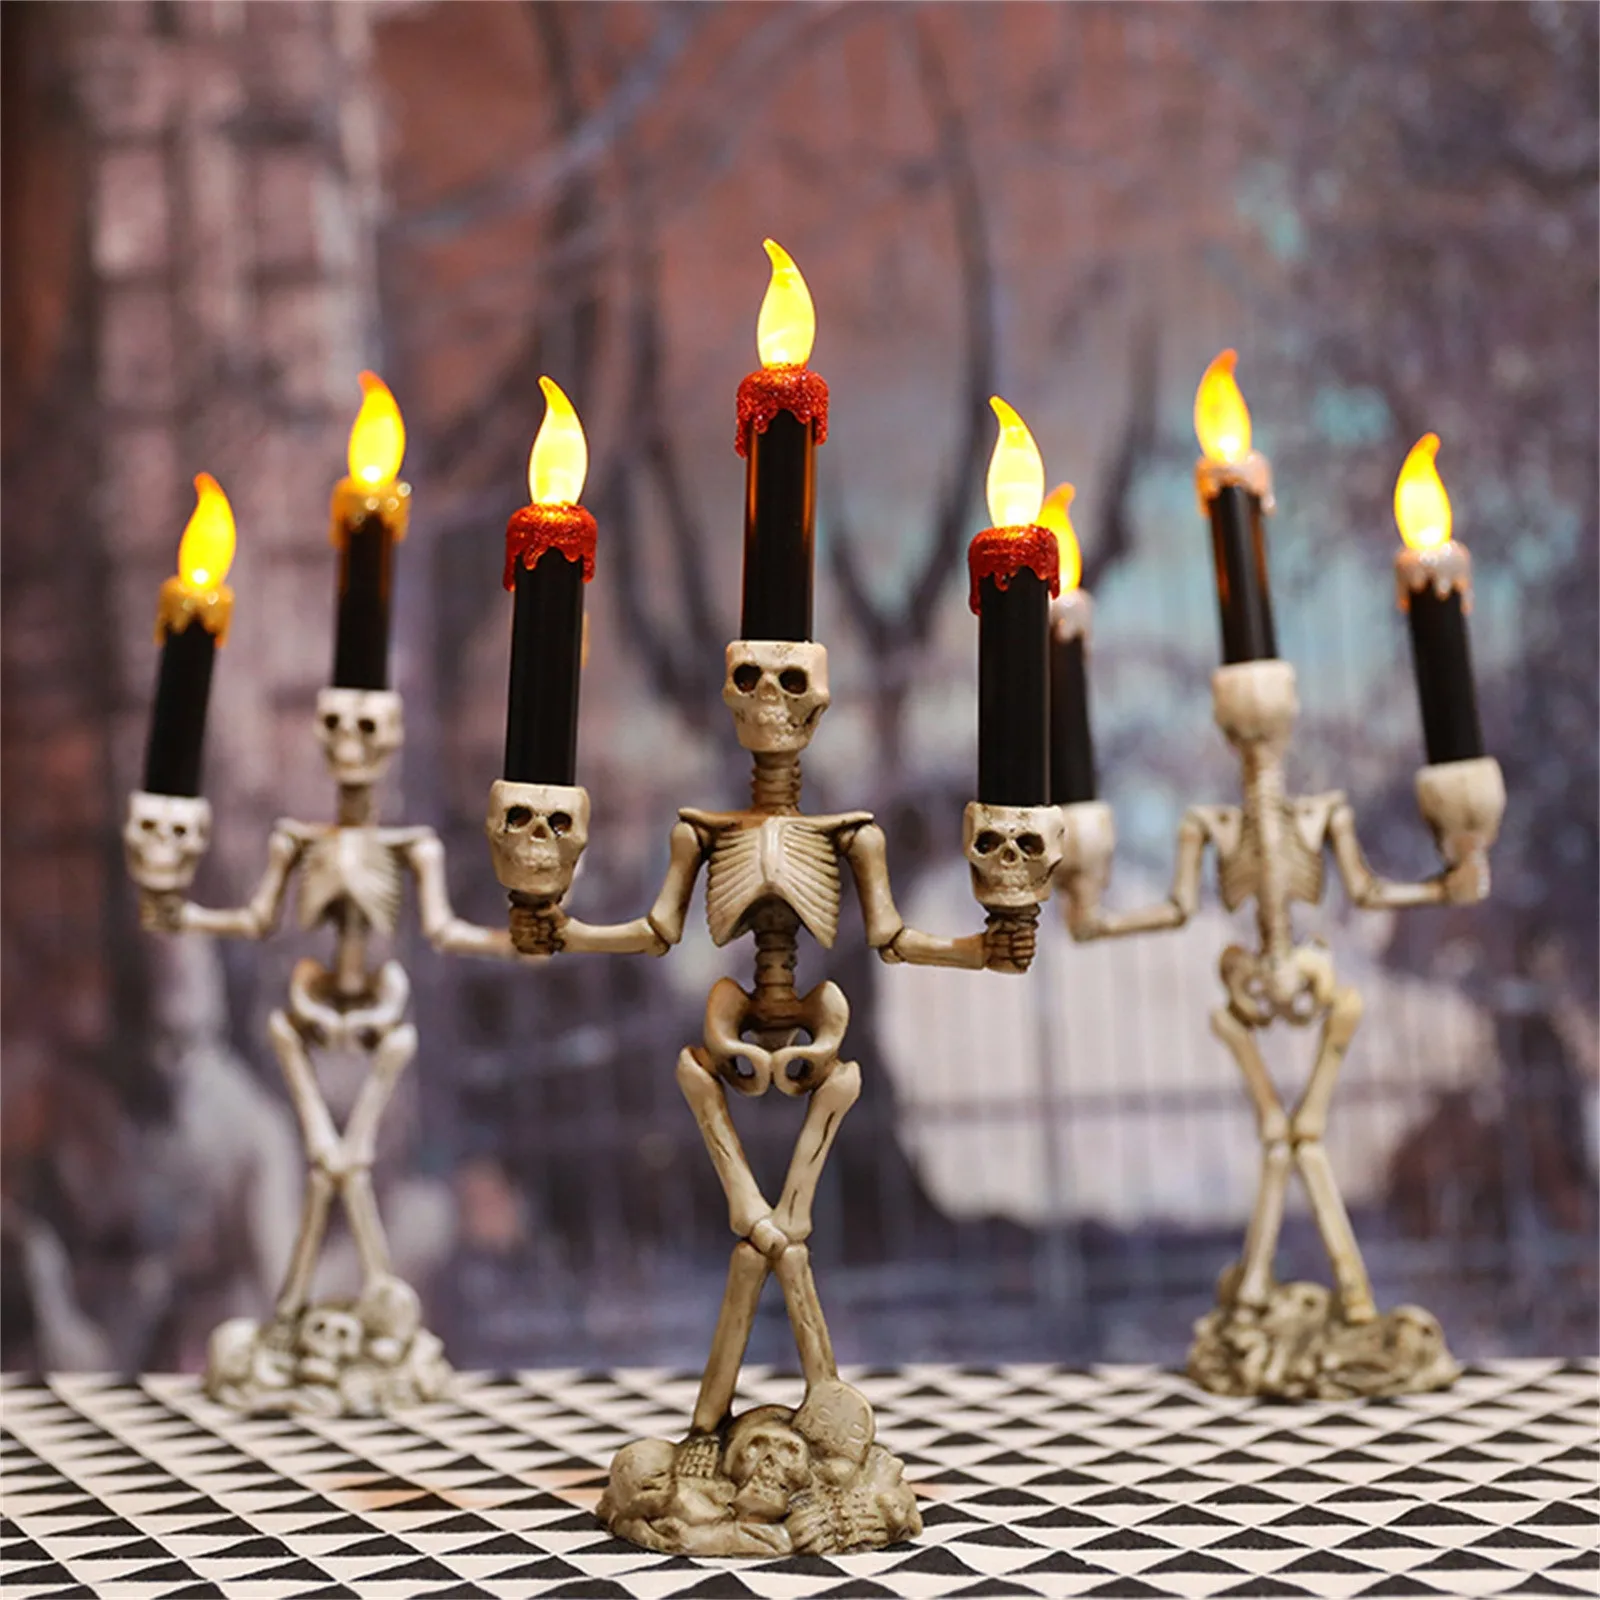 Triple LED Halloween Candles Light,URMAGIC Haunted Candelabra Prop,Skeleton Candlestick with 3 Flameless Candles,Battery Powered Halloween Skull Candle Holder Light,Halloween Decoration 